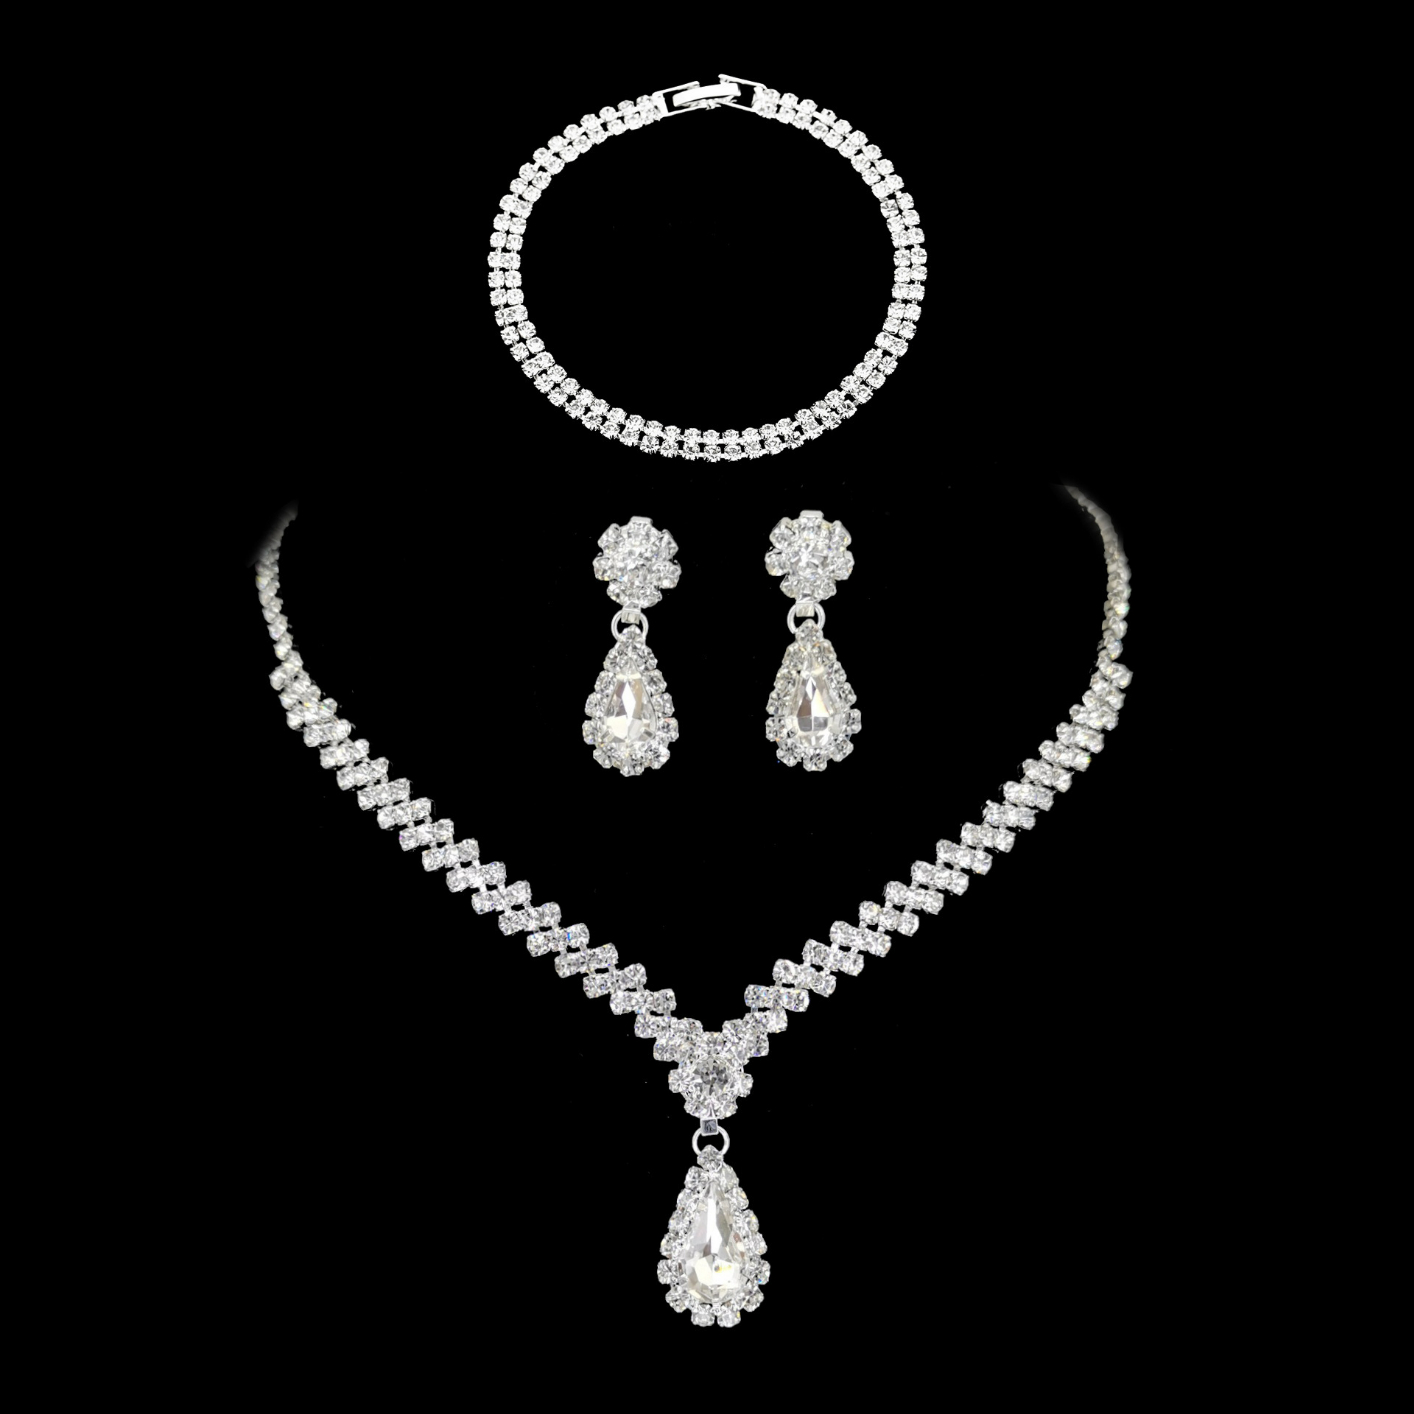 Necklace earring bracelet three-piece set silvery female jewelry CRRshop free shipping hot sale bridal wedding jewelry water diamond three-piece set best female sell Literary and artistic diamond drop earrings bracelet earrings necklace set fashion 